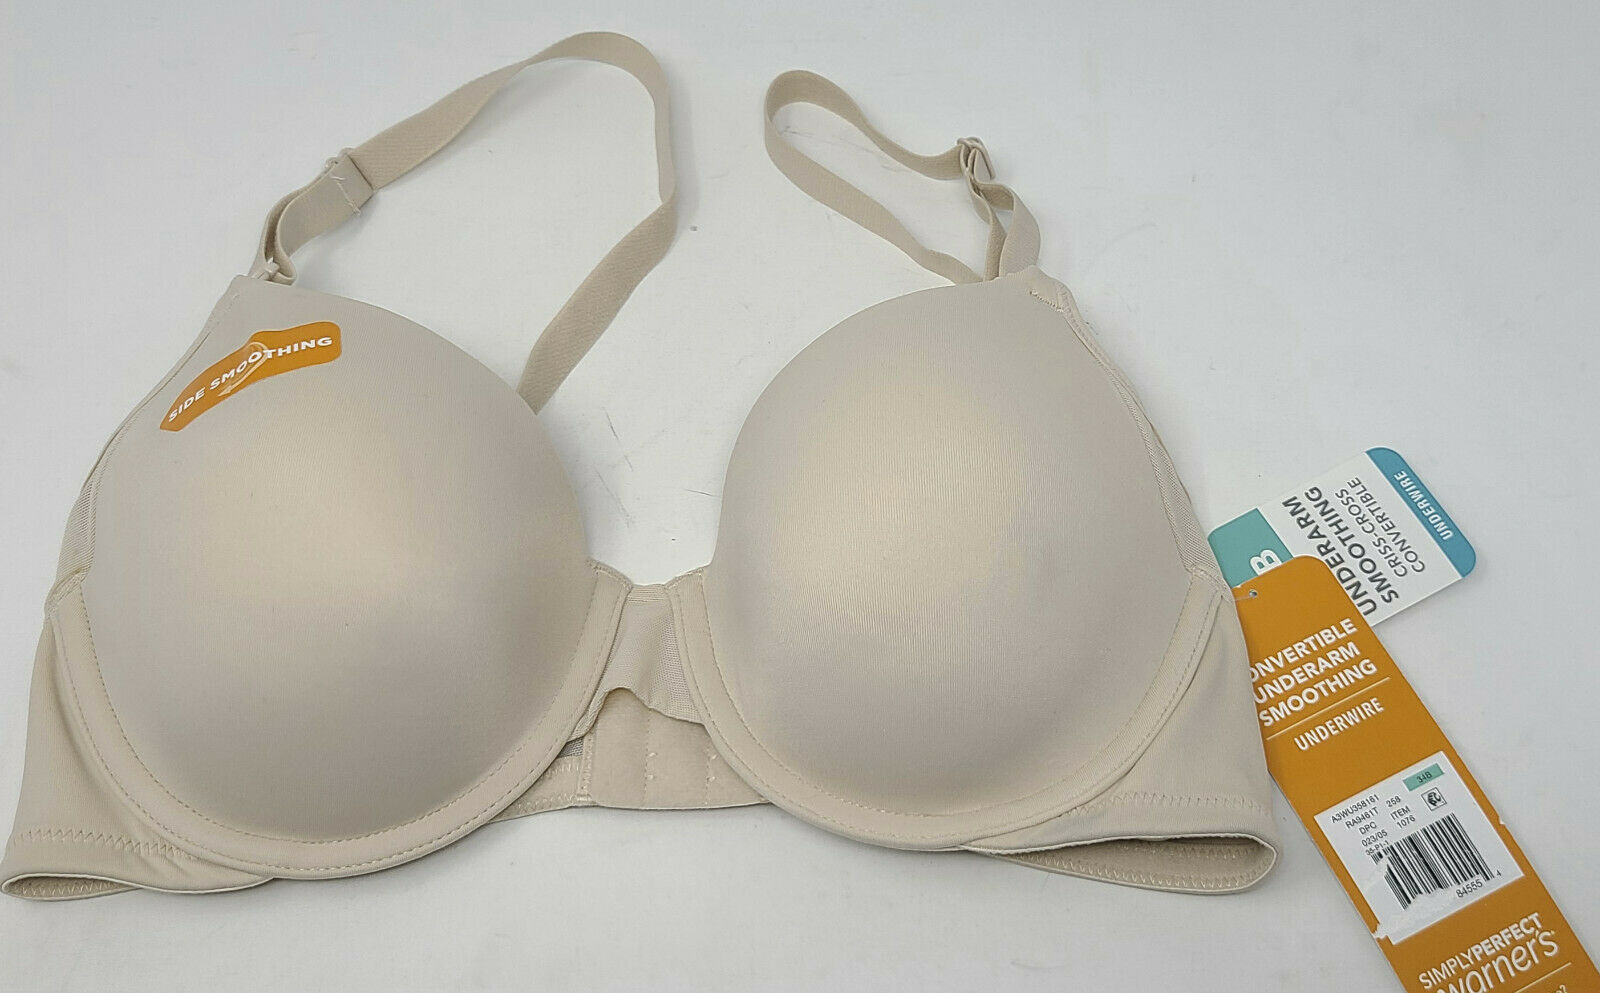 https://calebstreasures.com/wp-content/uploads/imported/3/Simply-Perfect-by-Warners-UNDERARM-SMOOTHING-MESH-UNDERWIRE-BRA-Butterscotch-34B-203889500663.jpg